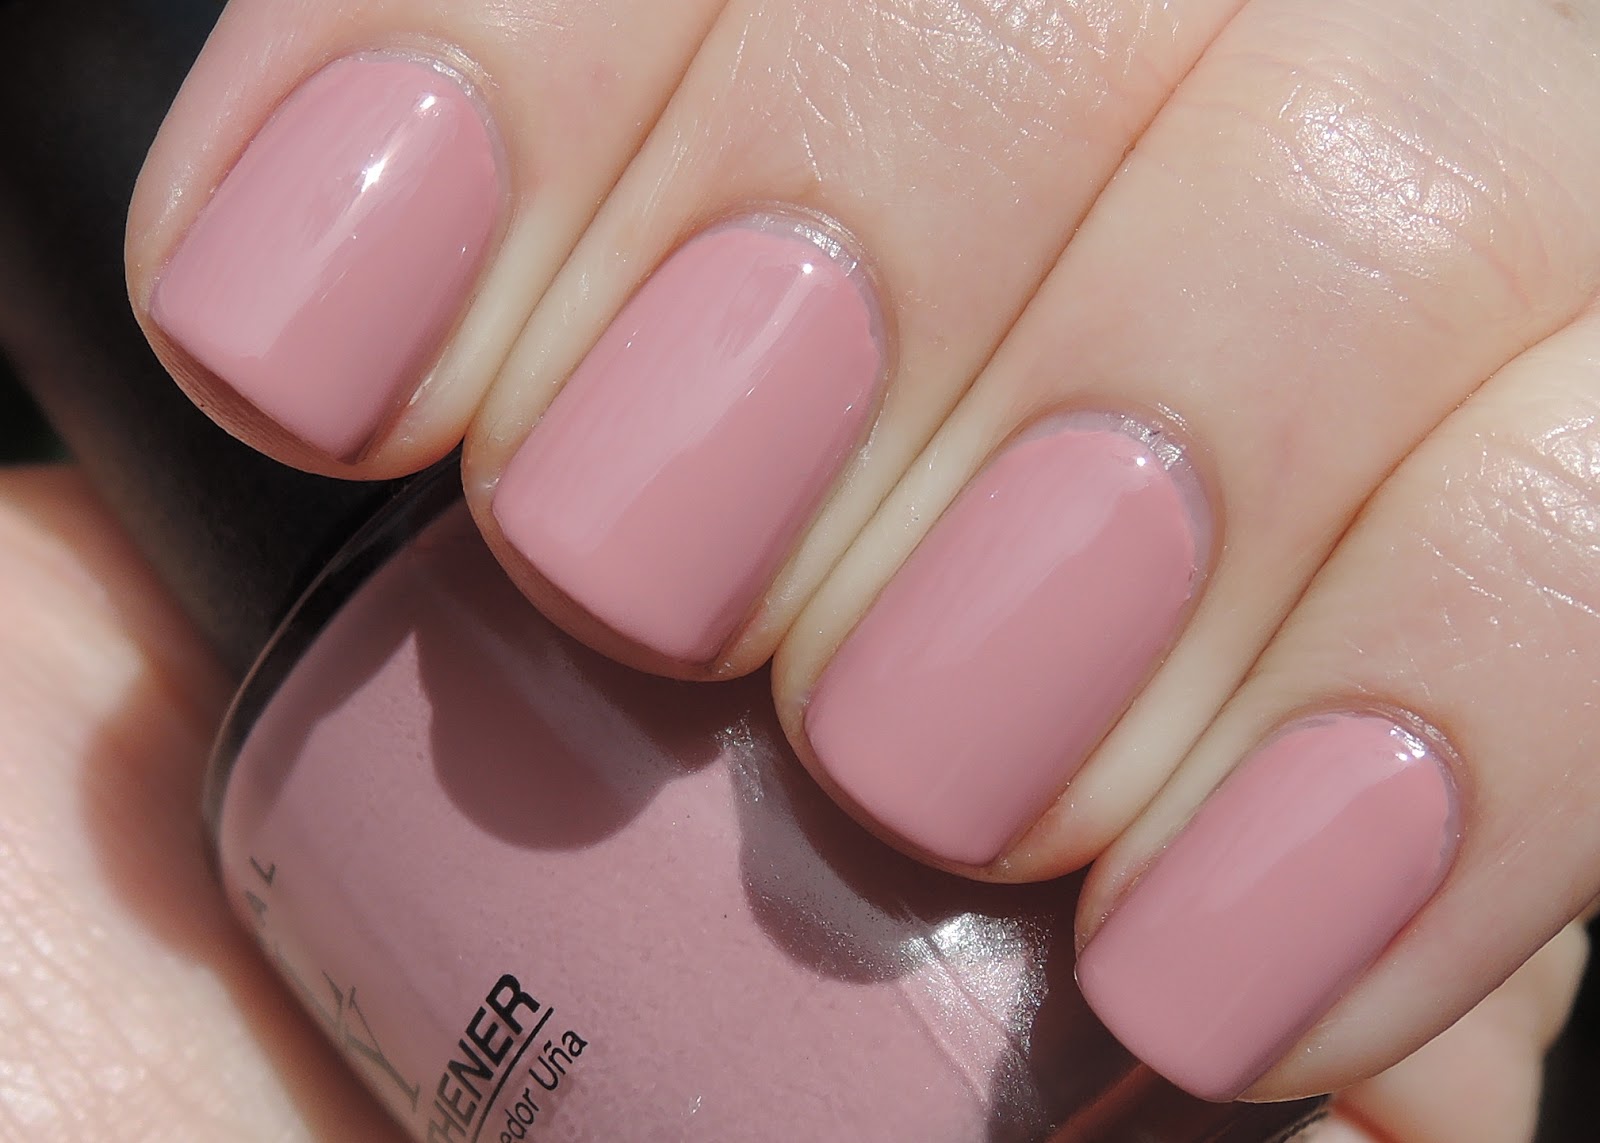 10. OPI Nail Lacquer in "Hawaiian Orchid" - wide 9